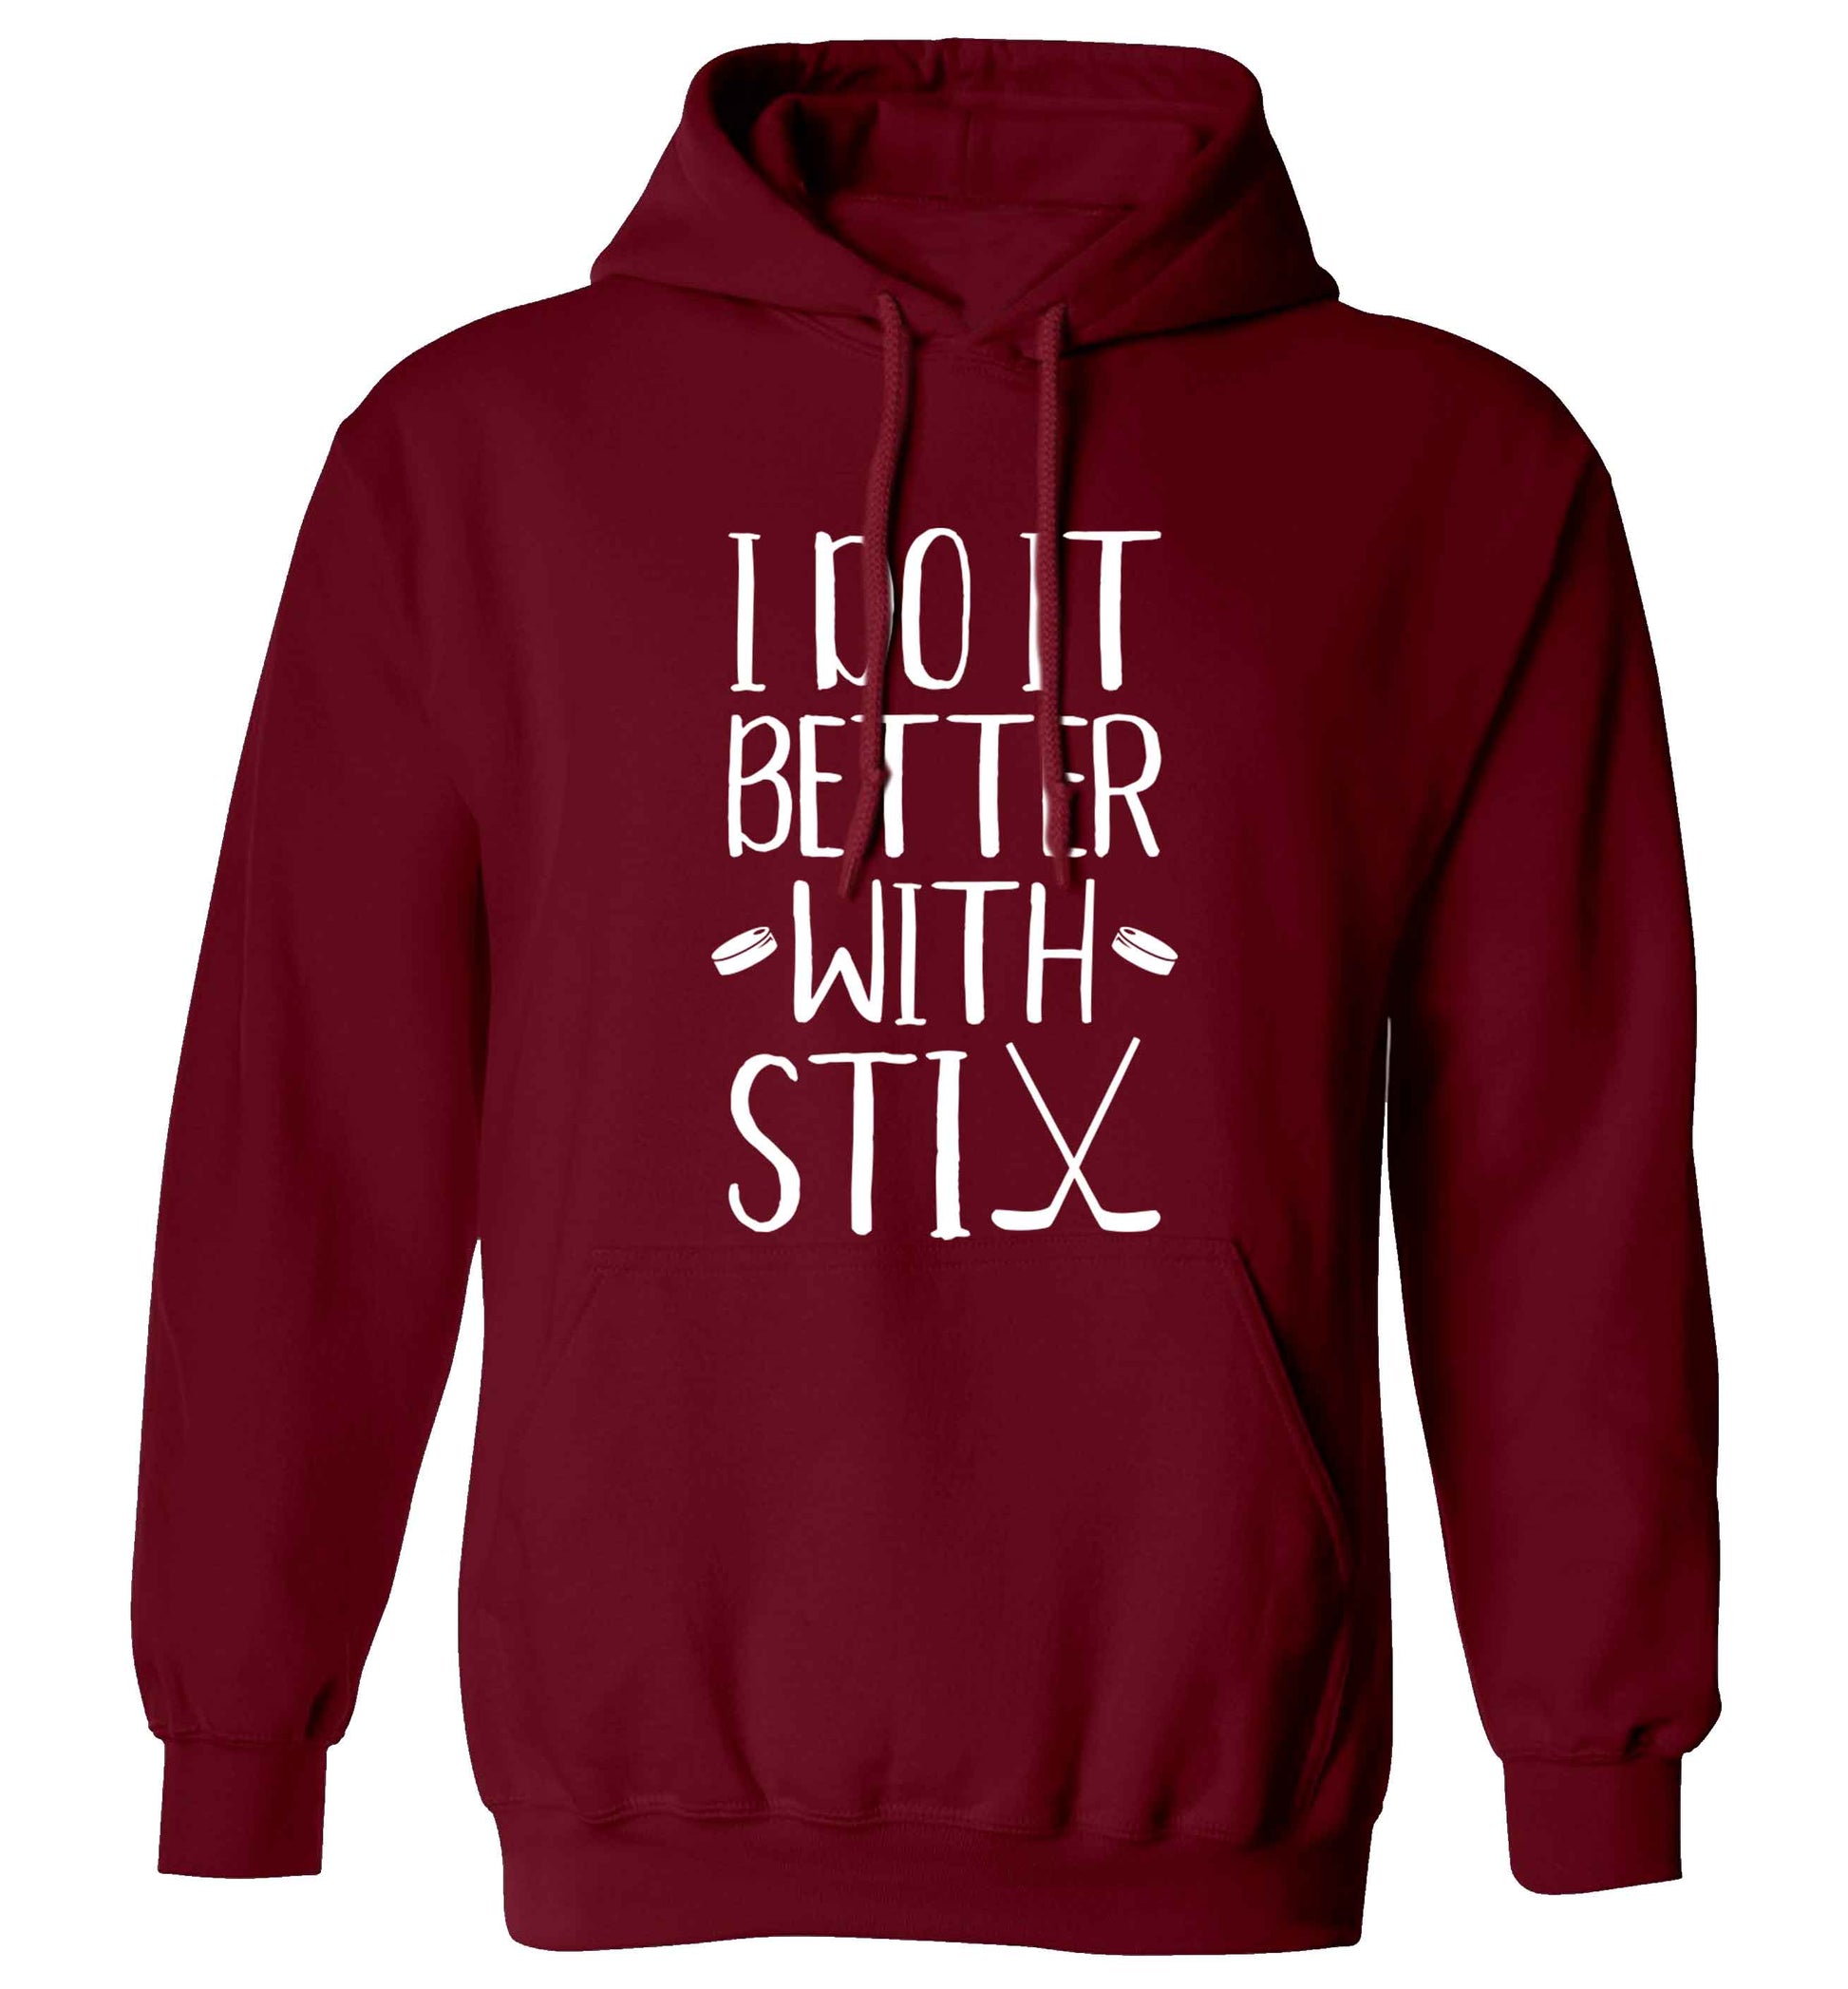 I do it better with stix (hockey) adults unisex maroon hoodie 2XL